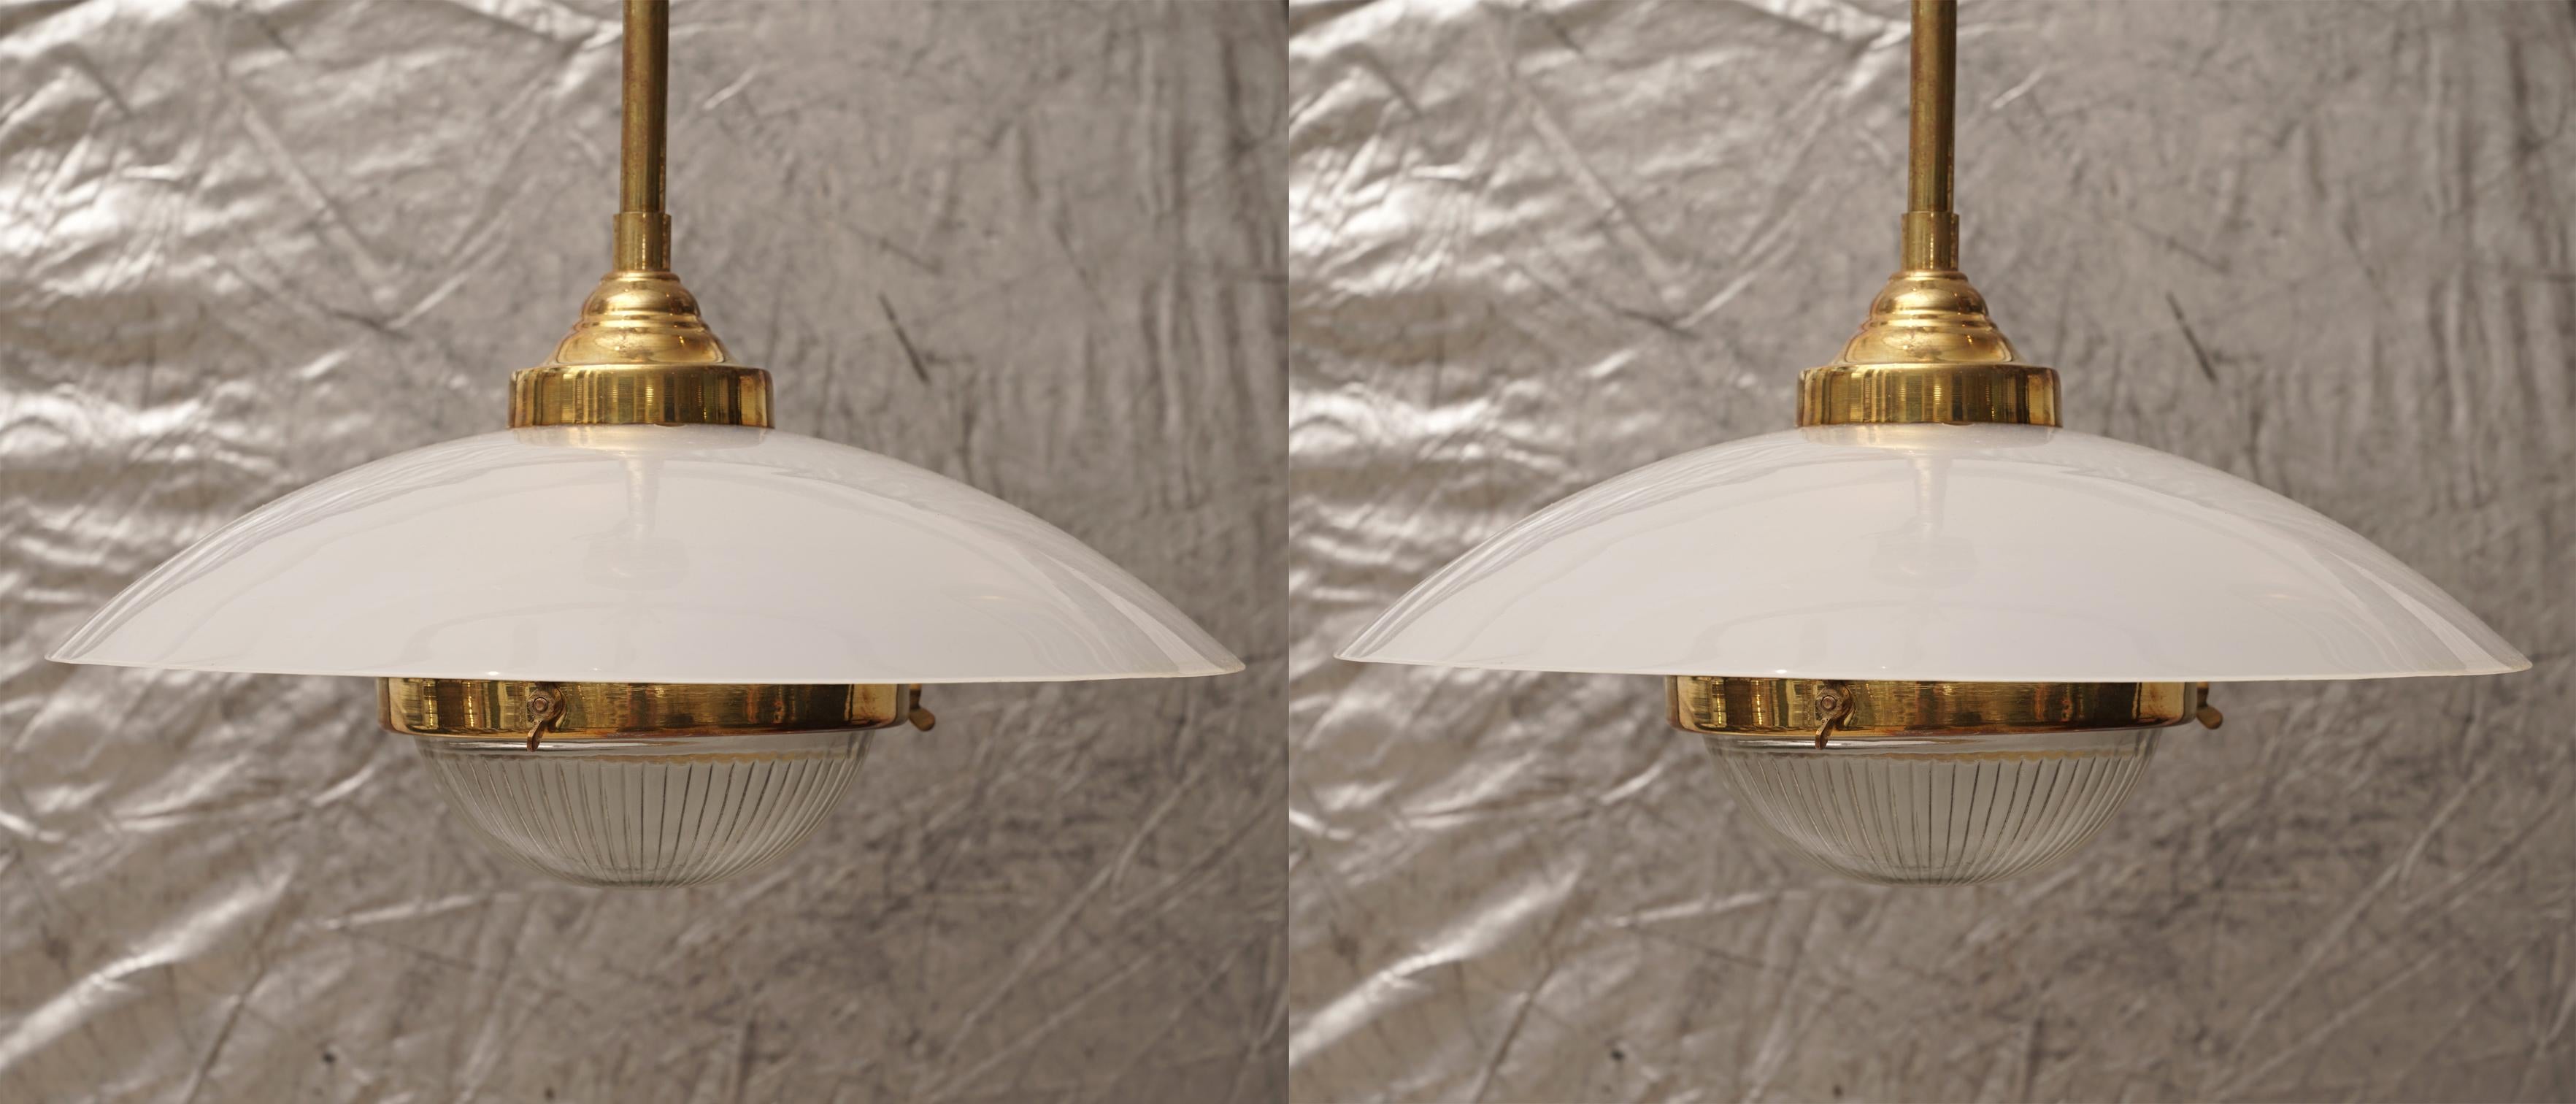 Pair of midcentury brass pendant lights with Lucite shade and textured glass lens. Takes a standard base light bulb and have been rewired for American use.